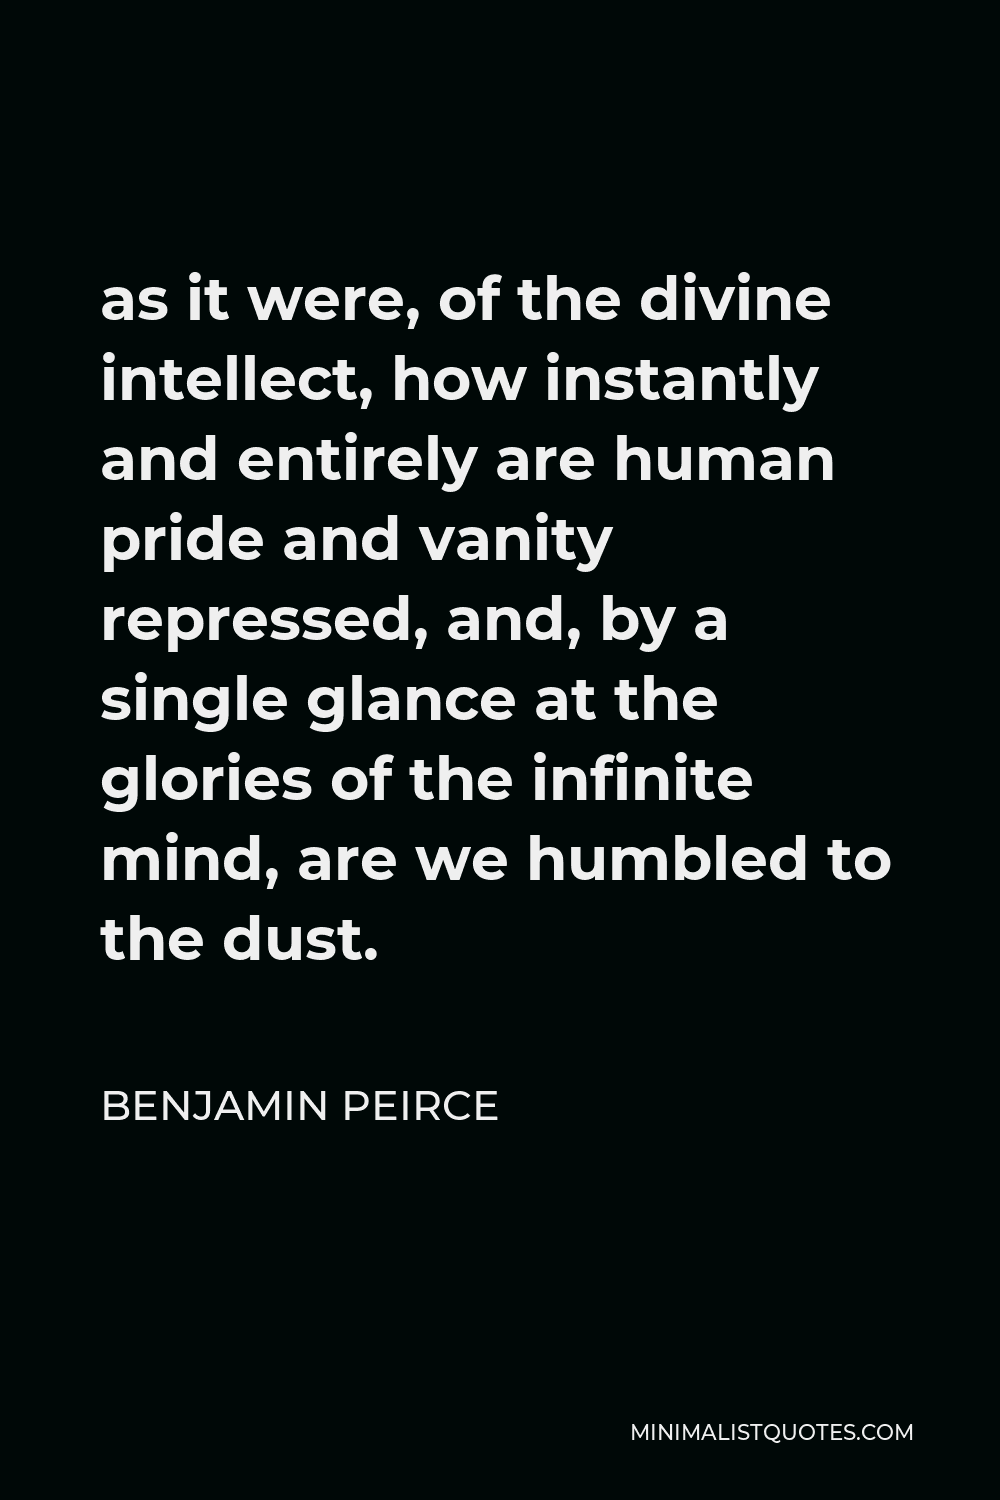 Benjamin Peirce Quote - as it were, of the divine intellect, how instantly and entirely are human pride and vanity repressed, and, by a single glance at the glories of the infinite mind, are we humbled to the dust.